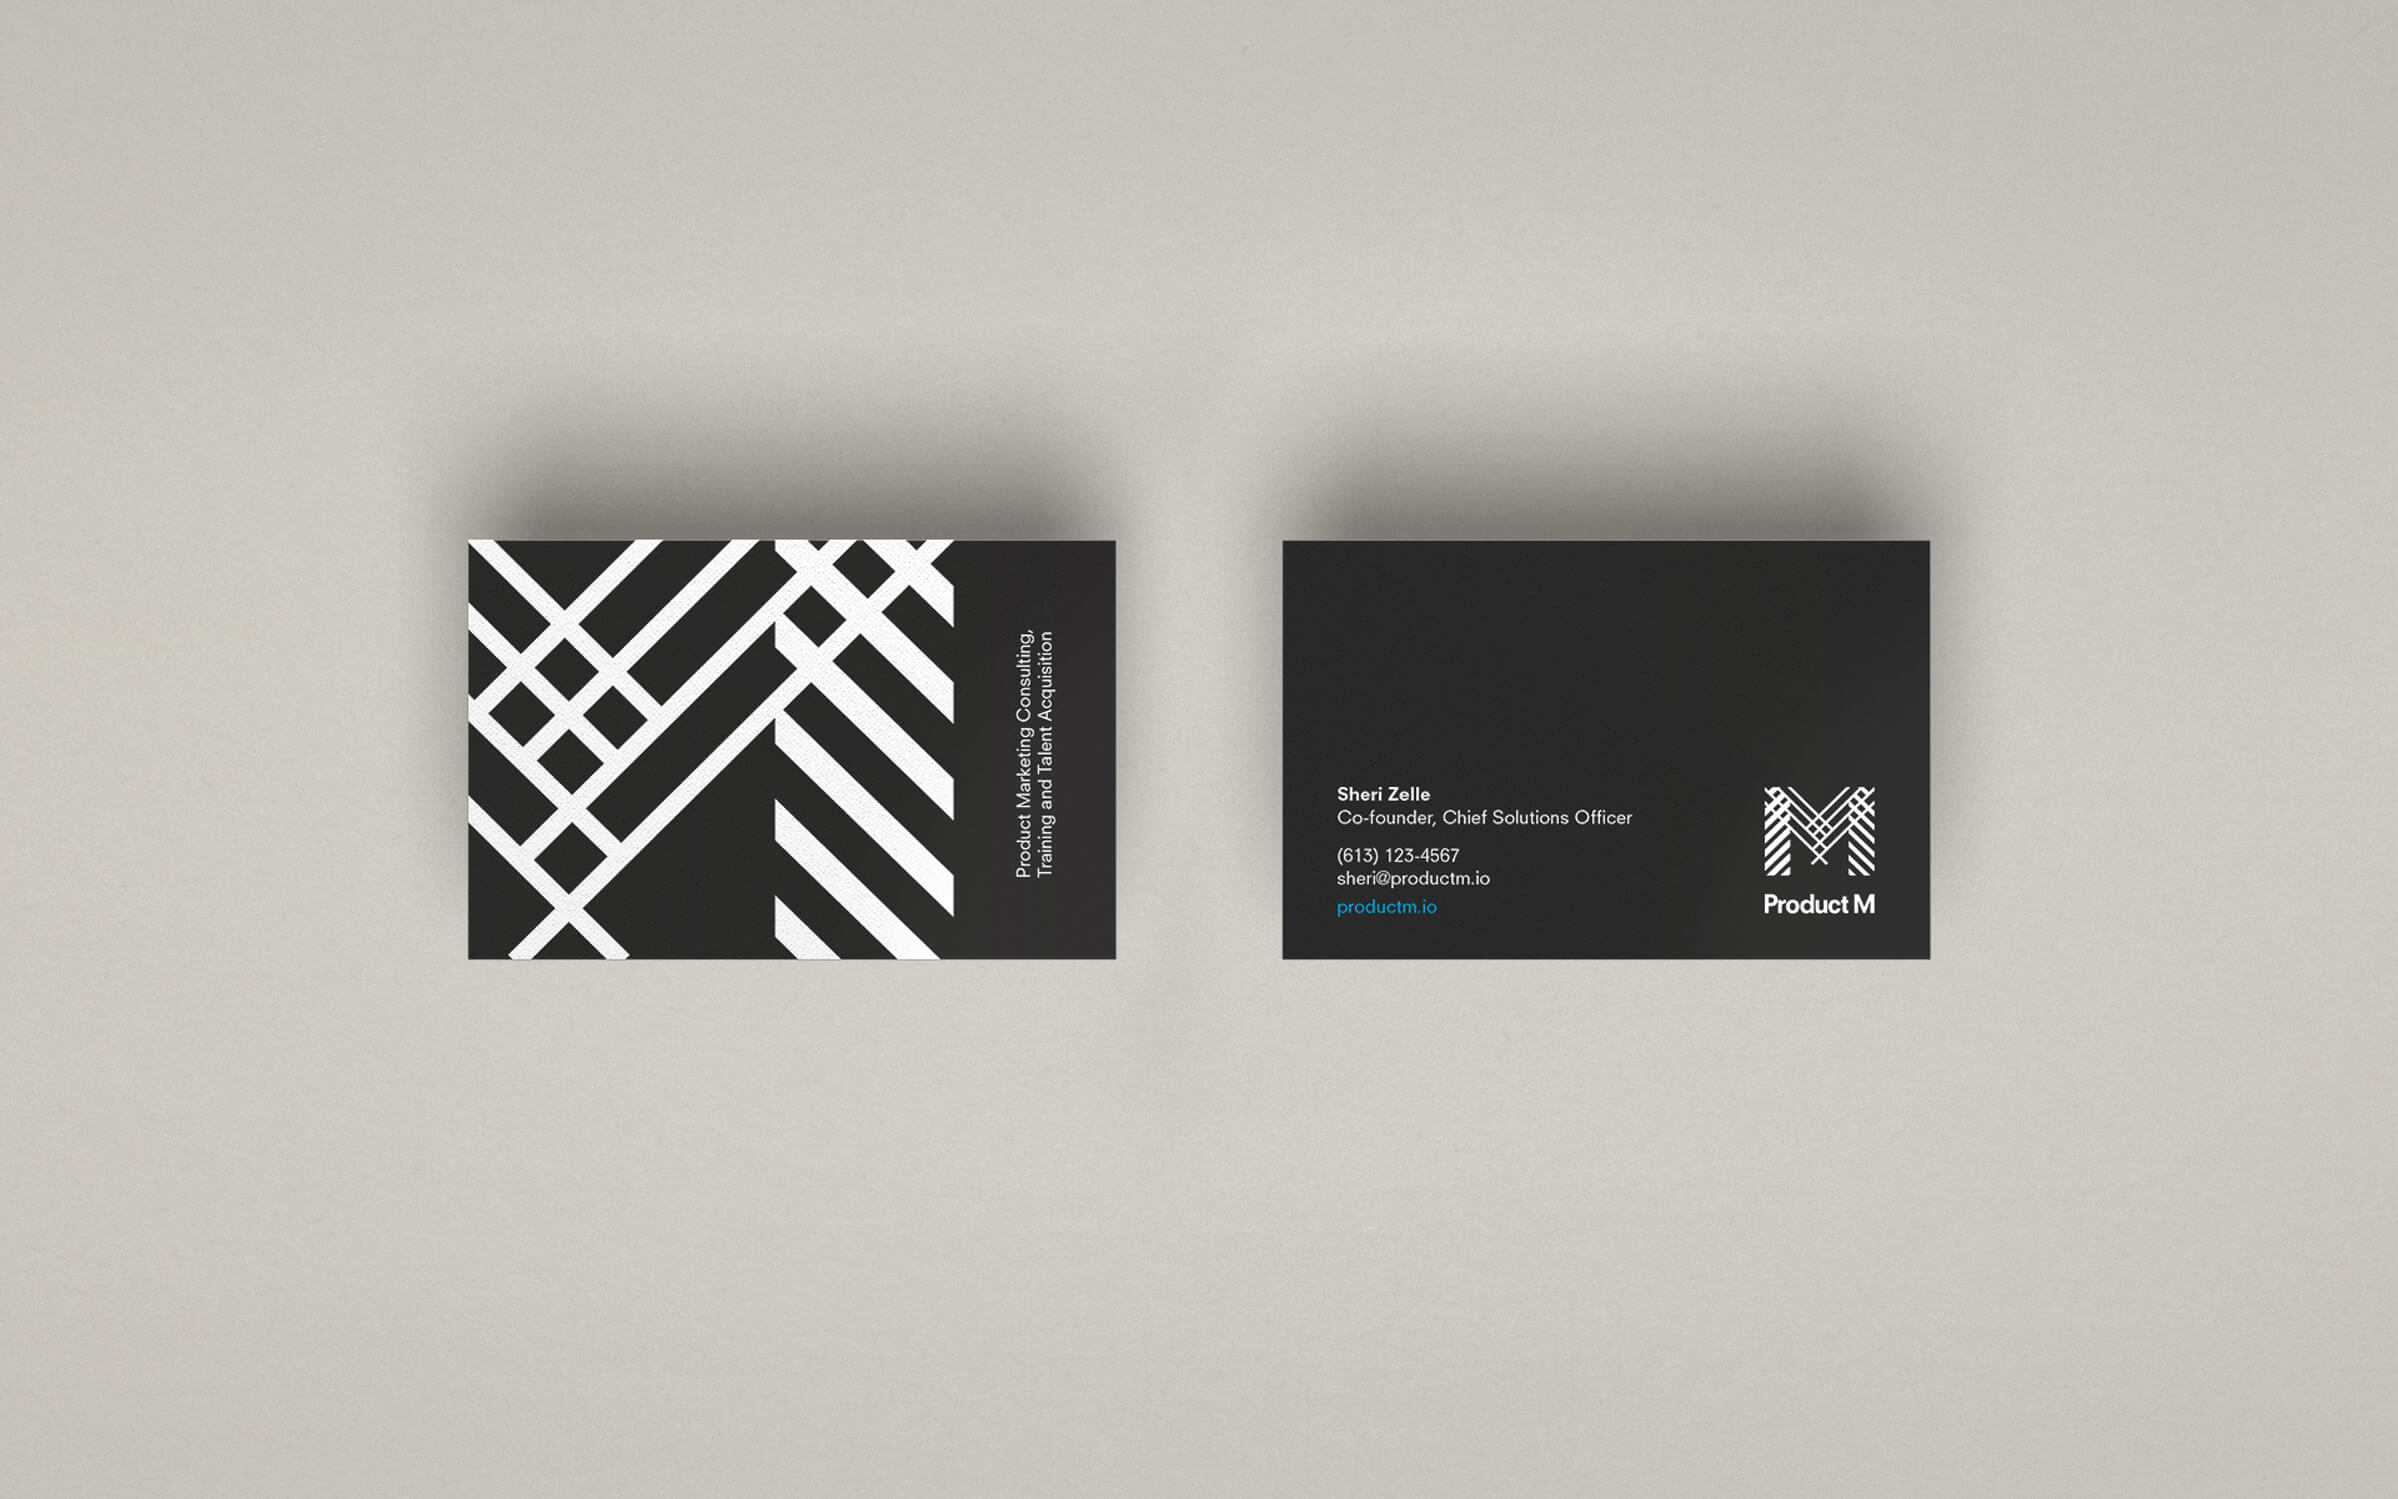 Product M business card for New York-based product marketing company by Ottawa graphic designer idApostle